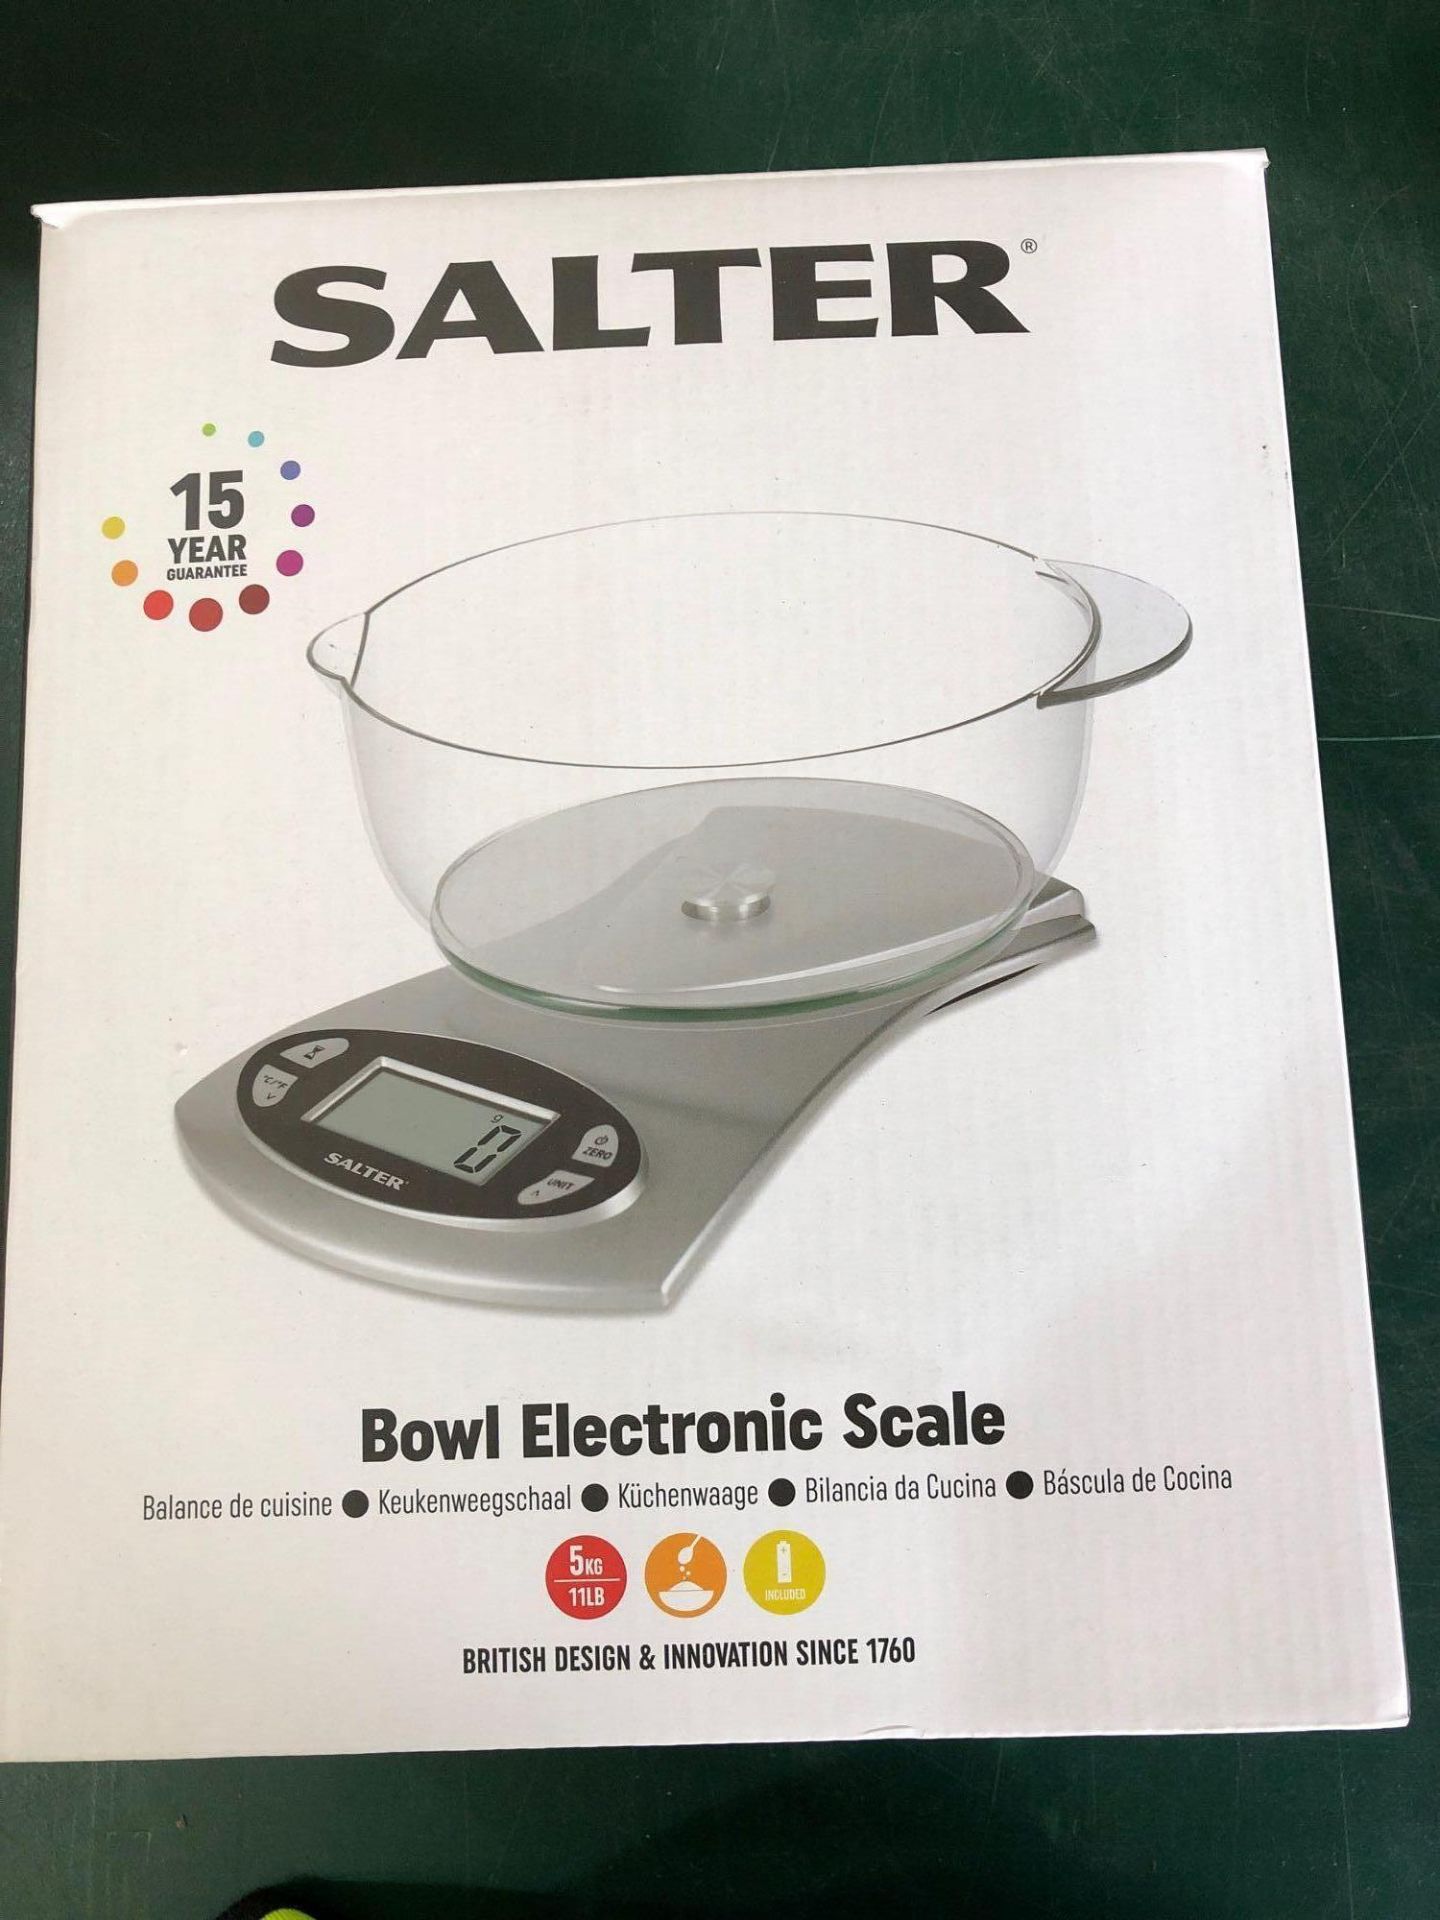 Salter Disc Electronic Digital Kitchen Scales - Black £13.29 RRP - Image 4 of 4